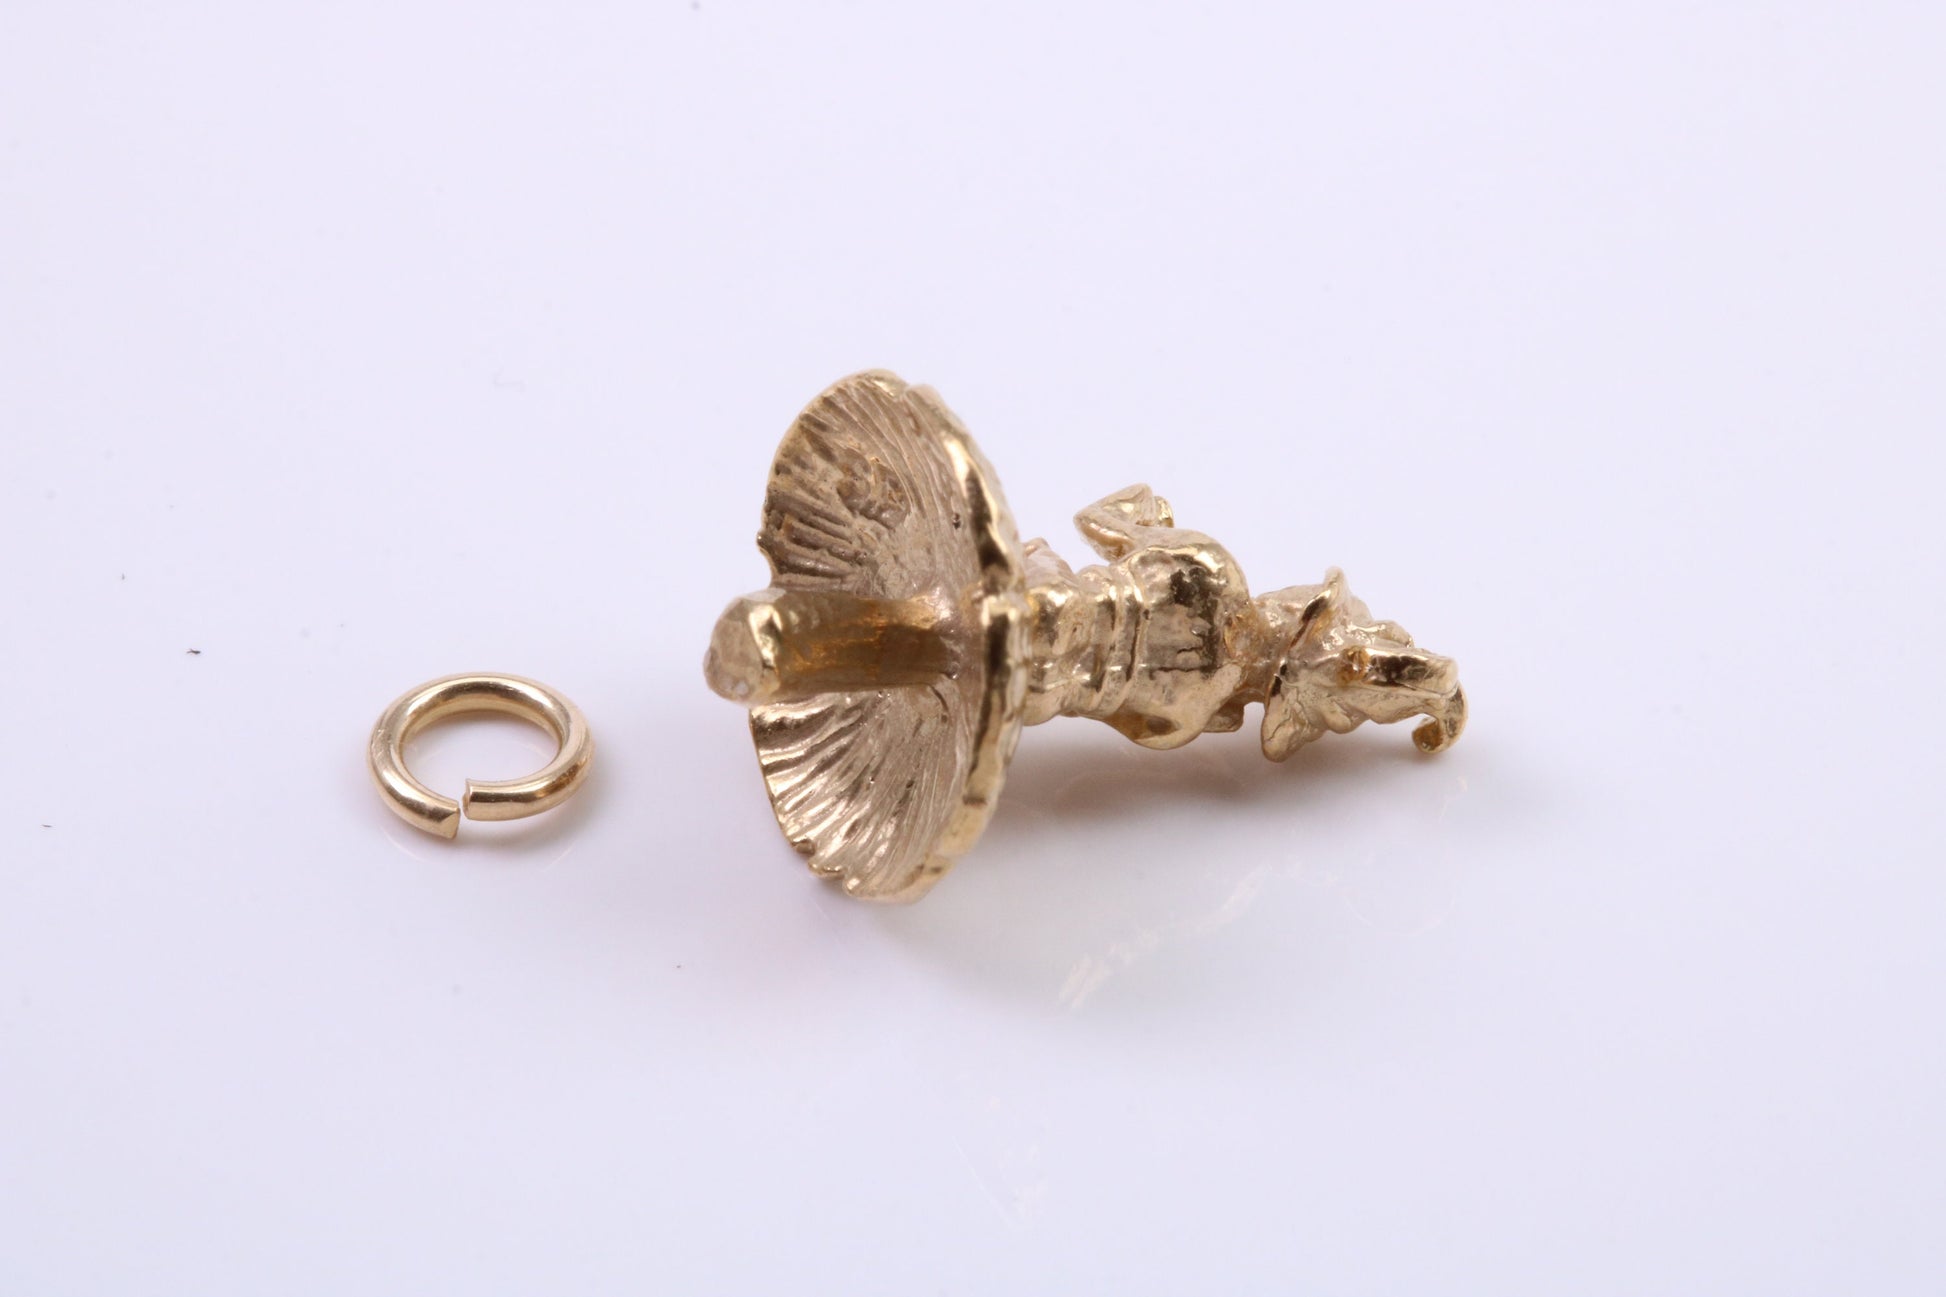 Gnome on Toadstool Charm, Traditional Charm, Made from Solid 9ct Yellow Gold, British Hallmarked, Complete with Attachment Link